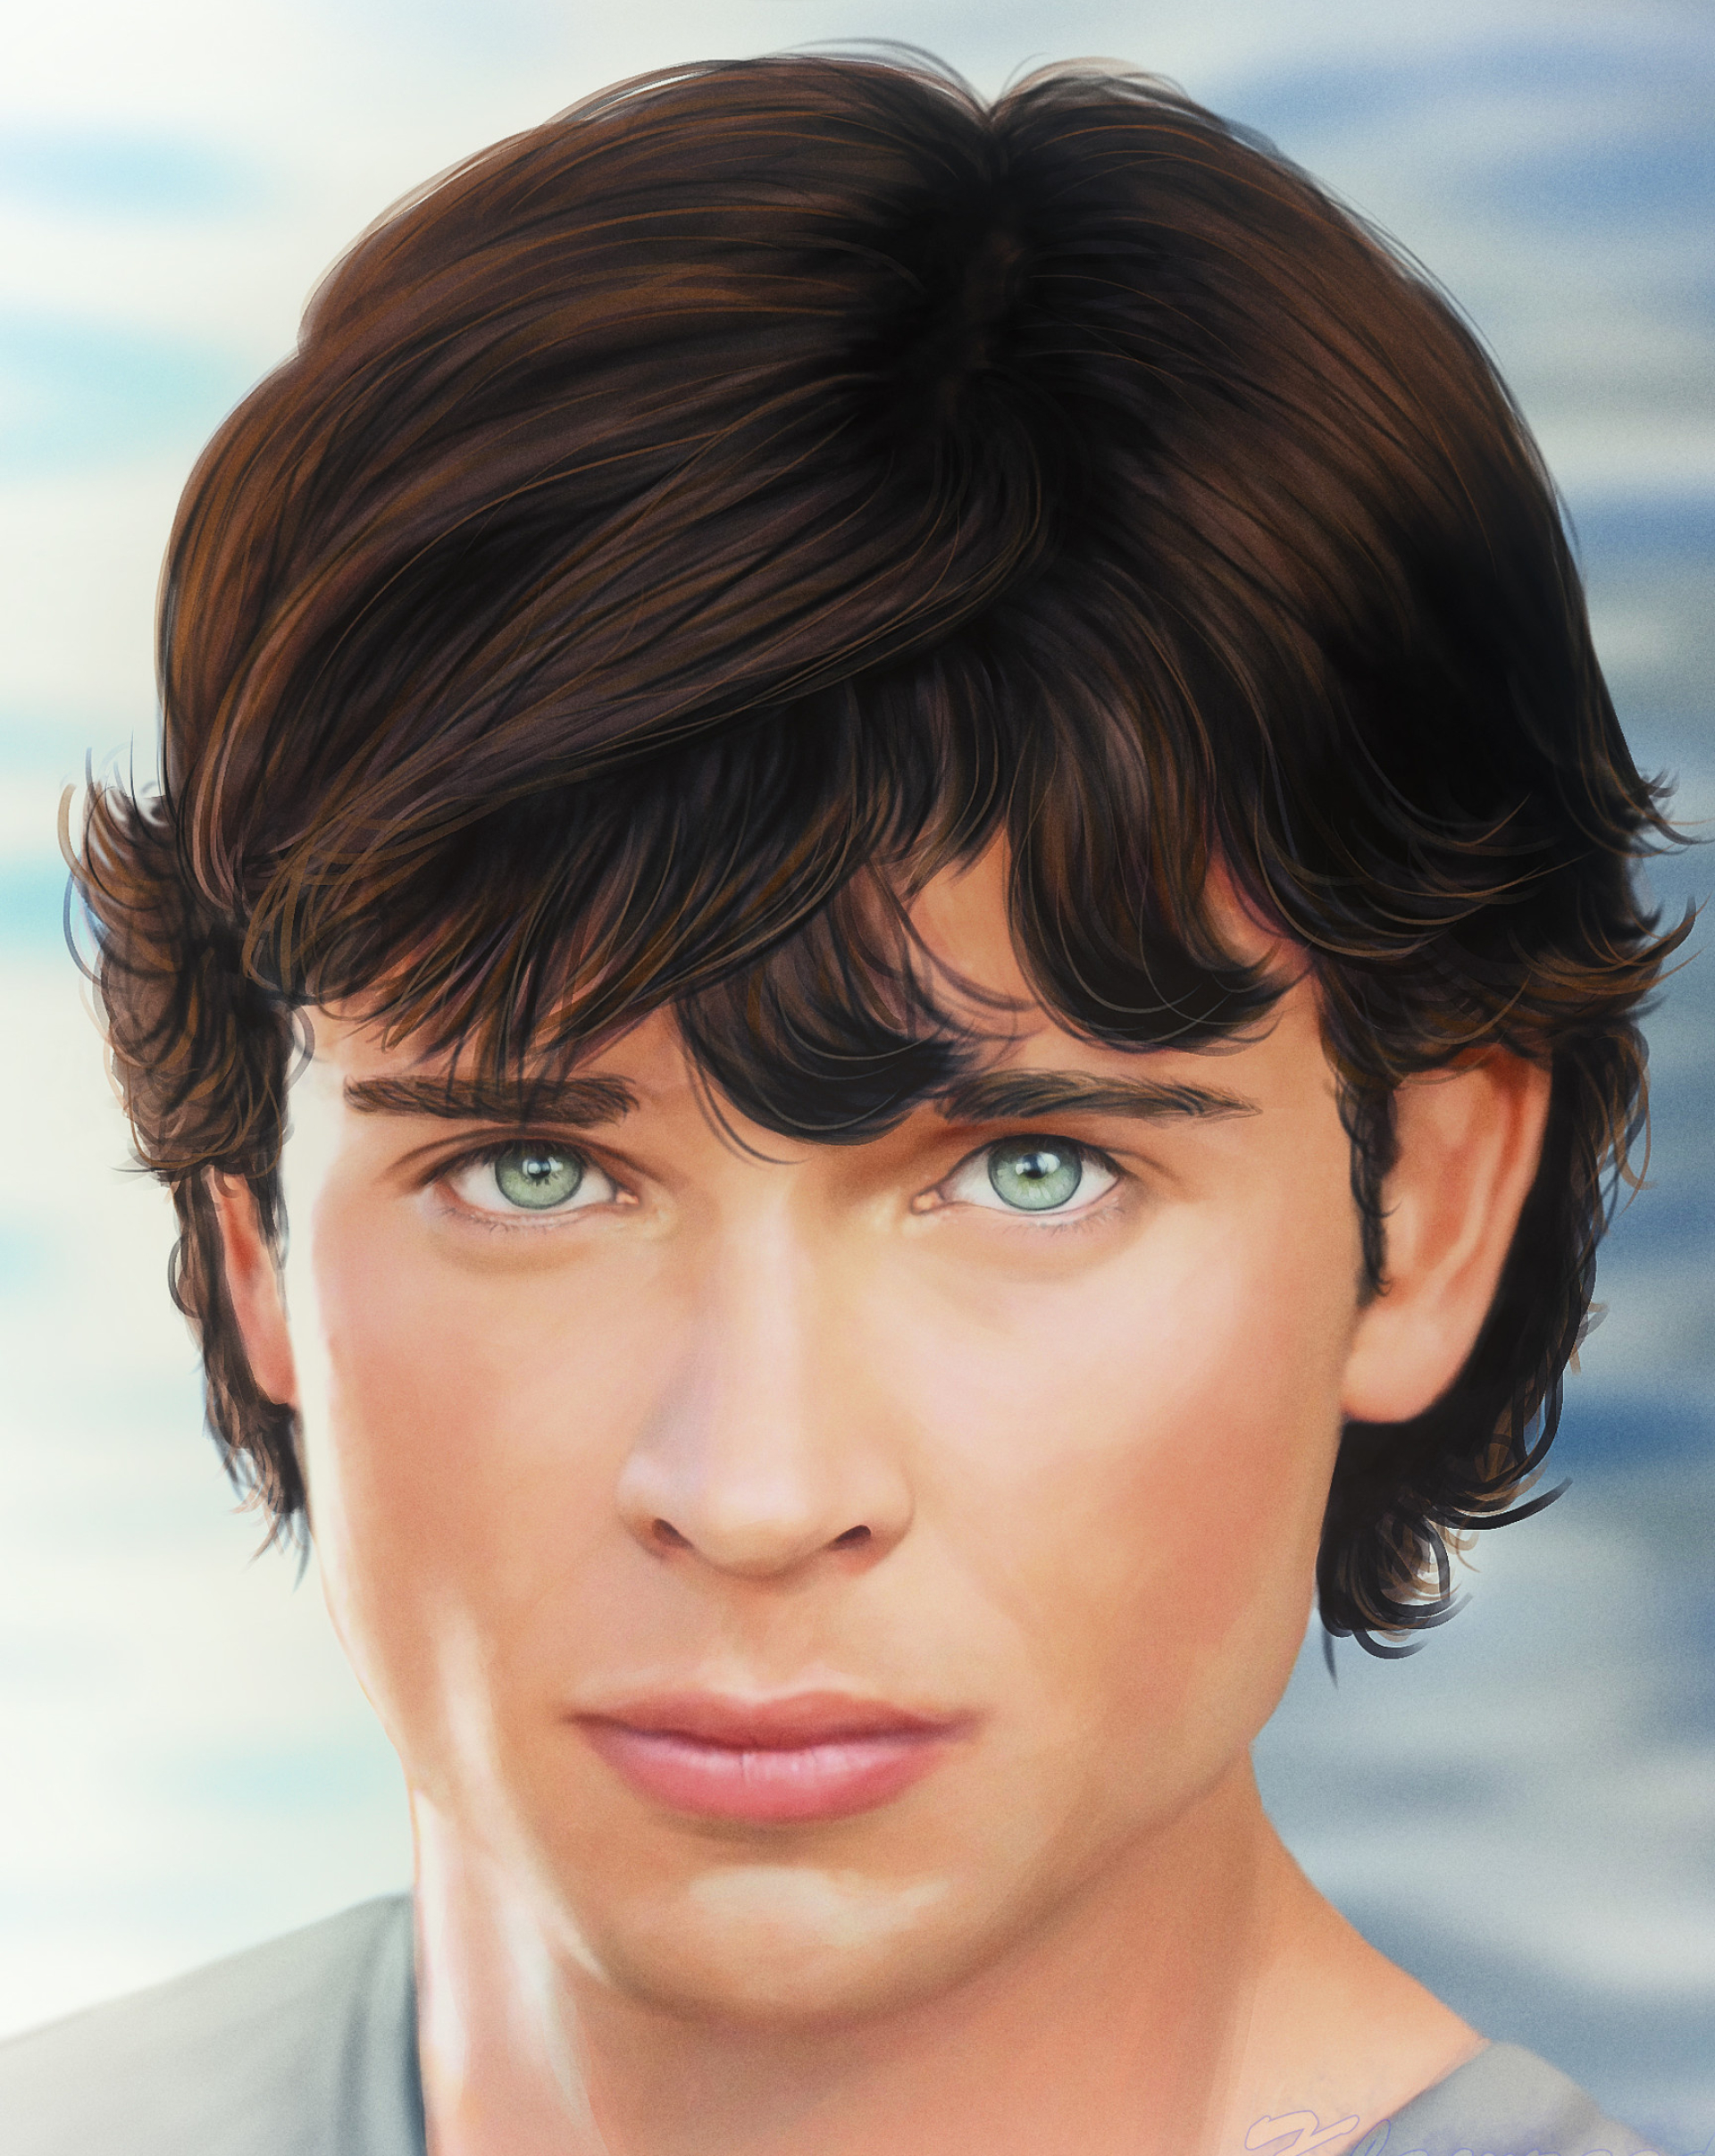 Tom Welling movies, Smallville star, Action thriller, Deep Six, 1920x2420 HD Phone